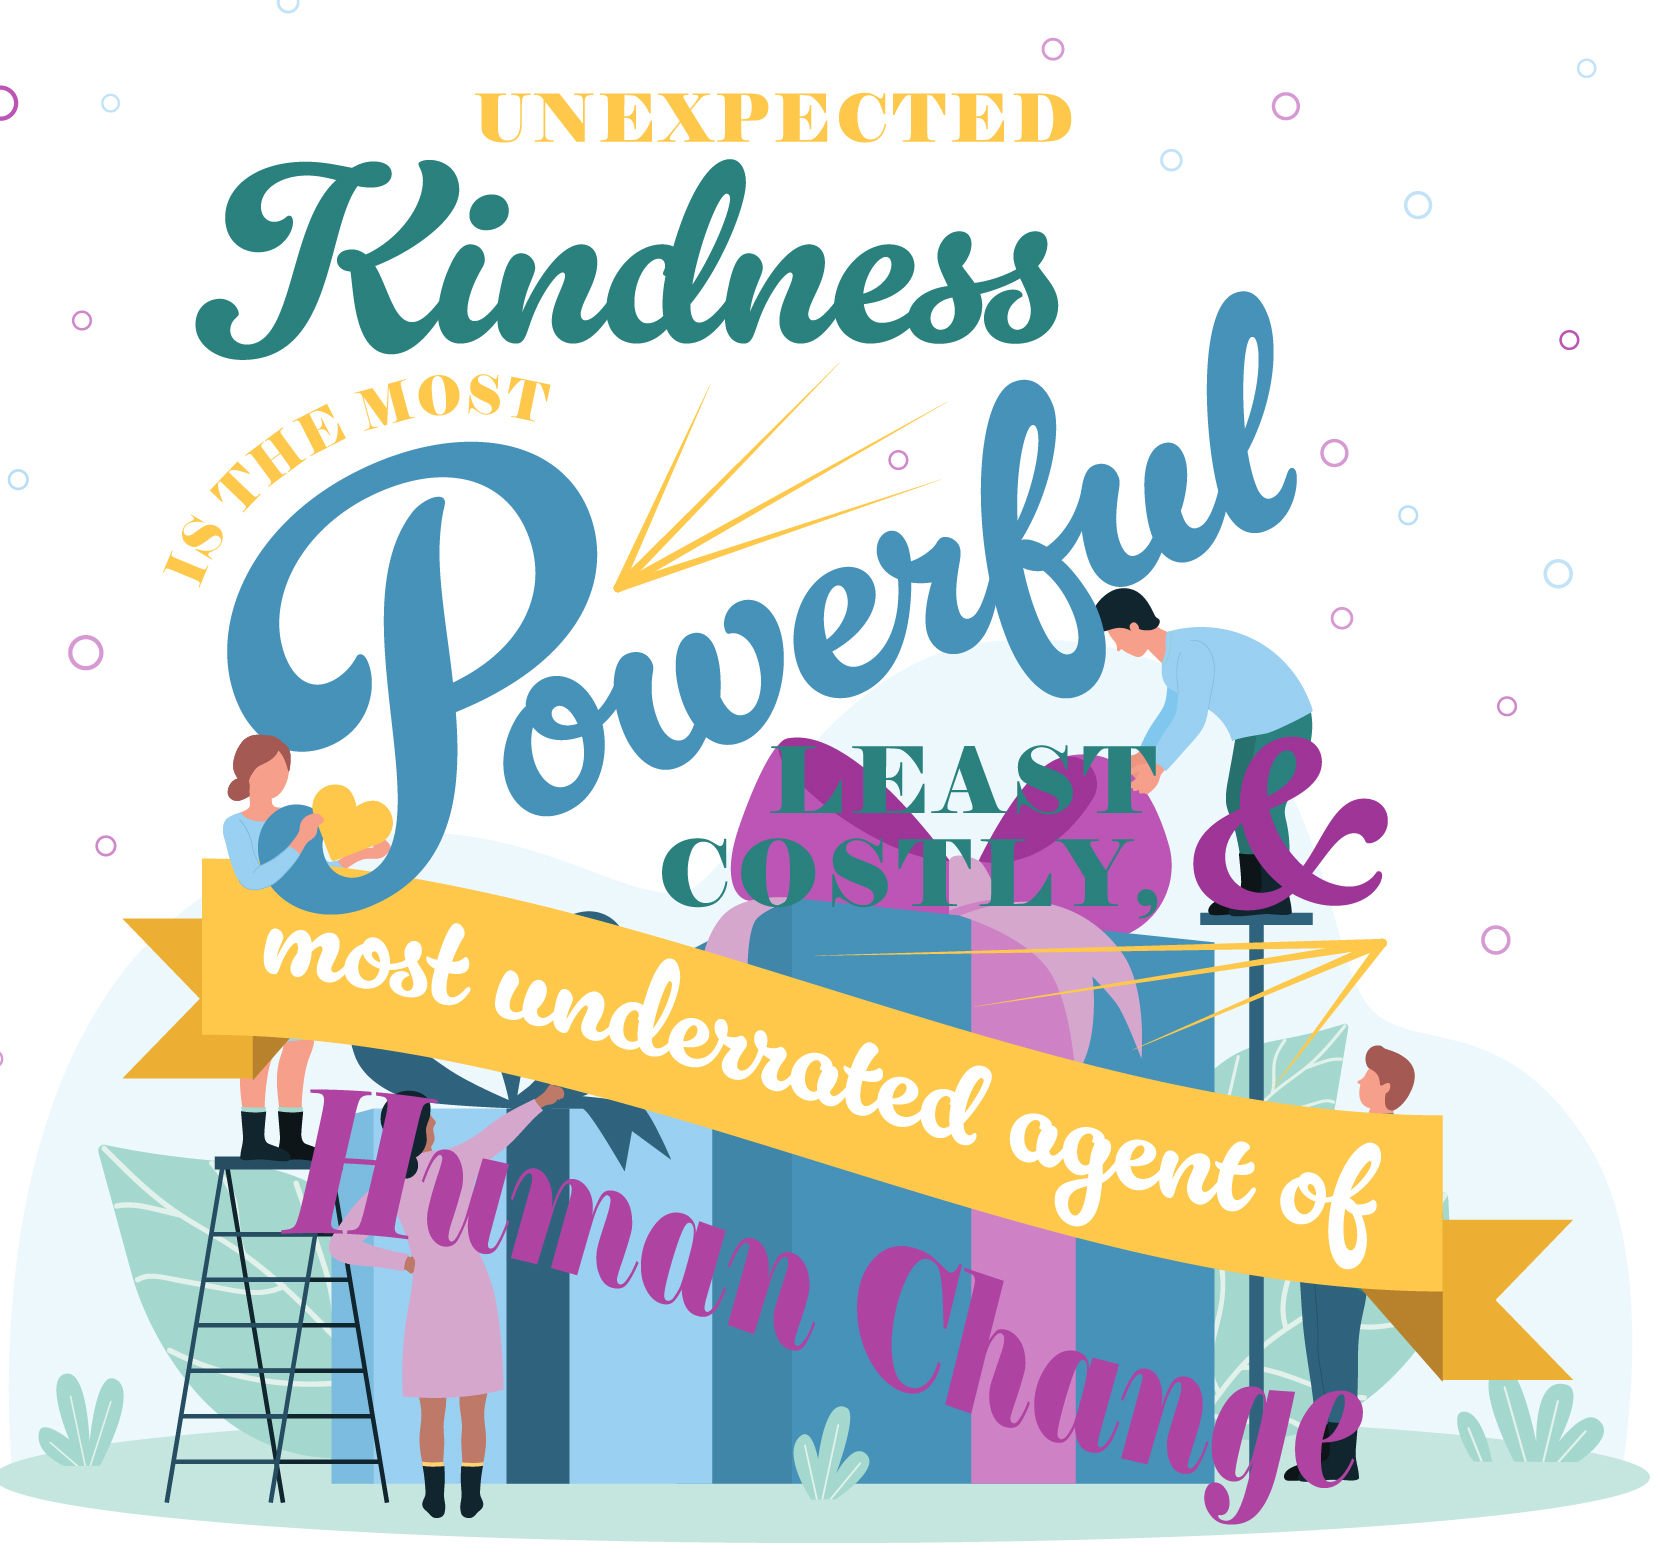 Unexpected kindness is the most powerful, least costly, most underrated agent of human change.